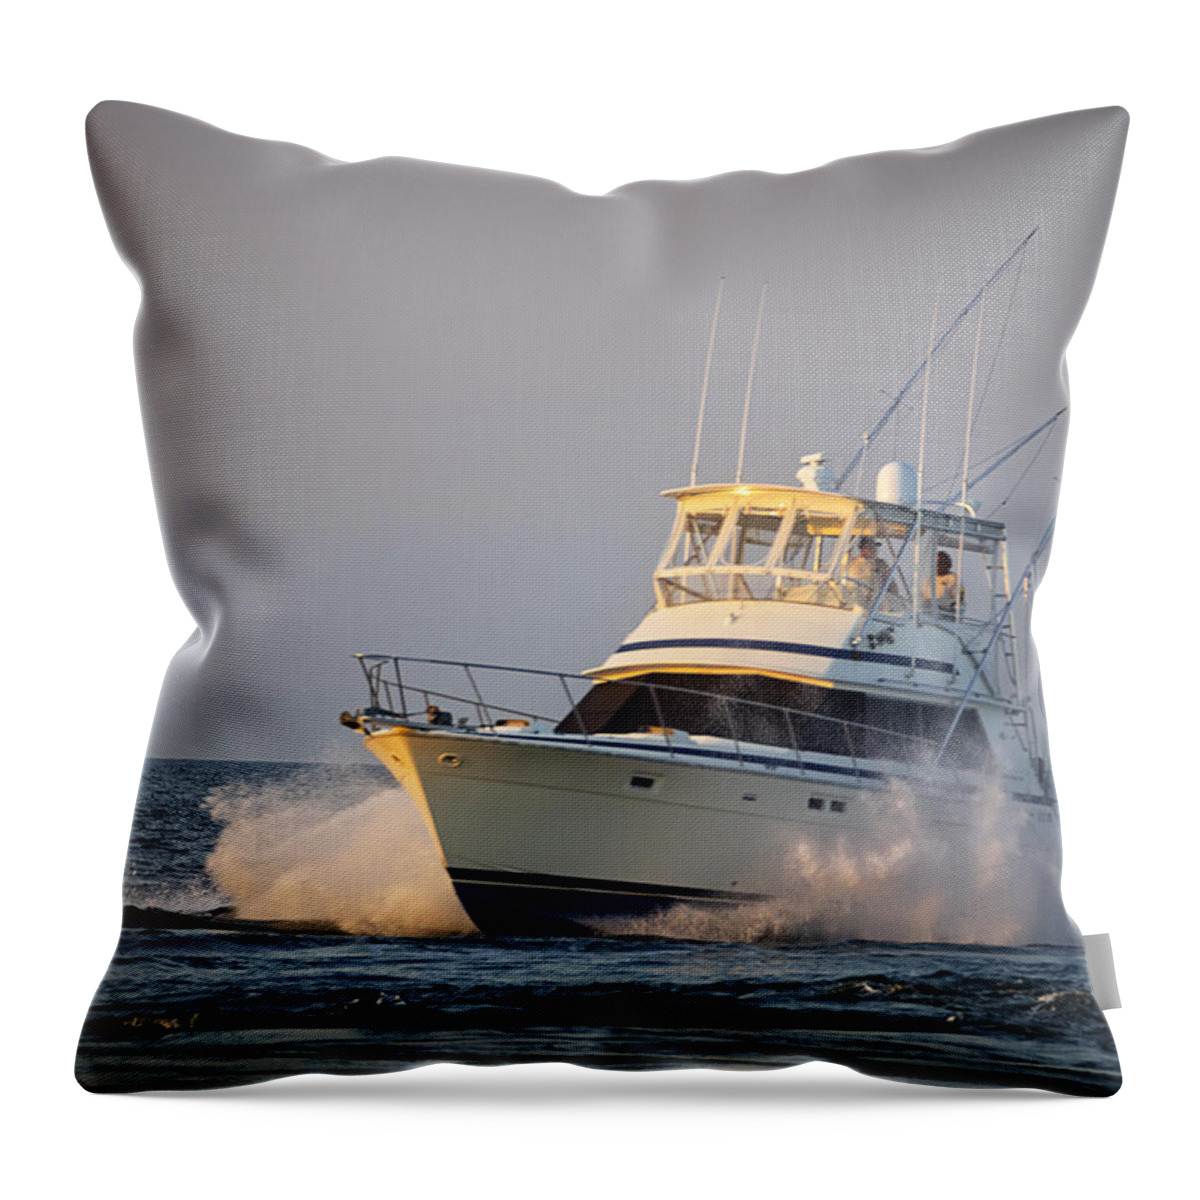 Yacht Throw Pillow featuring the photograph Heaading Home by David Kay